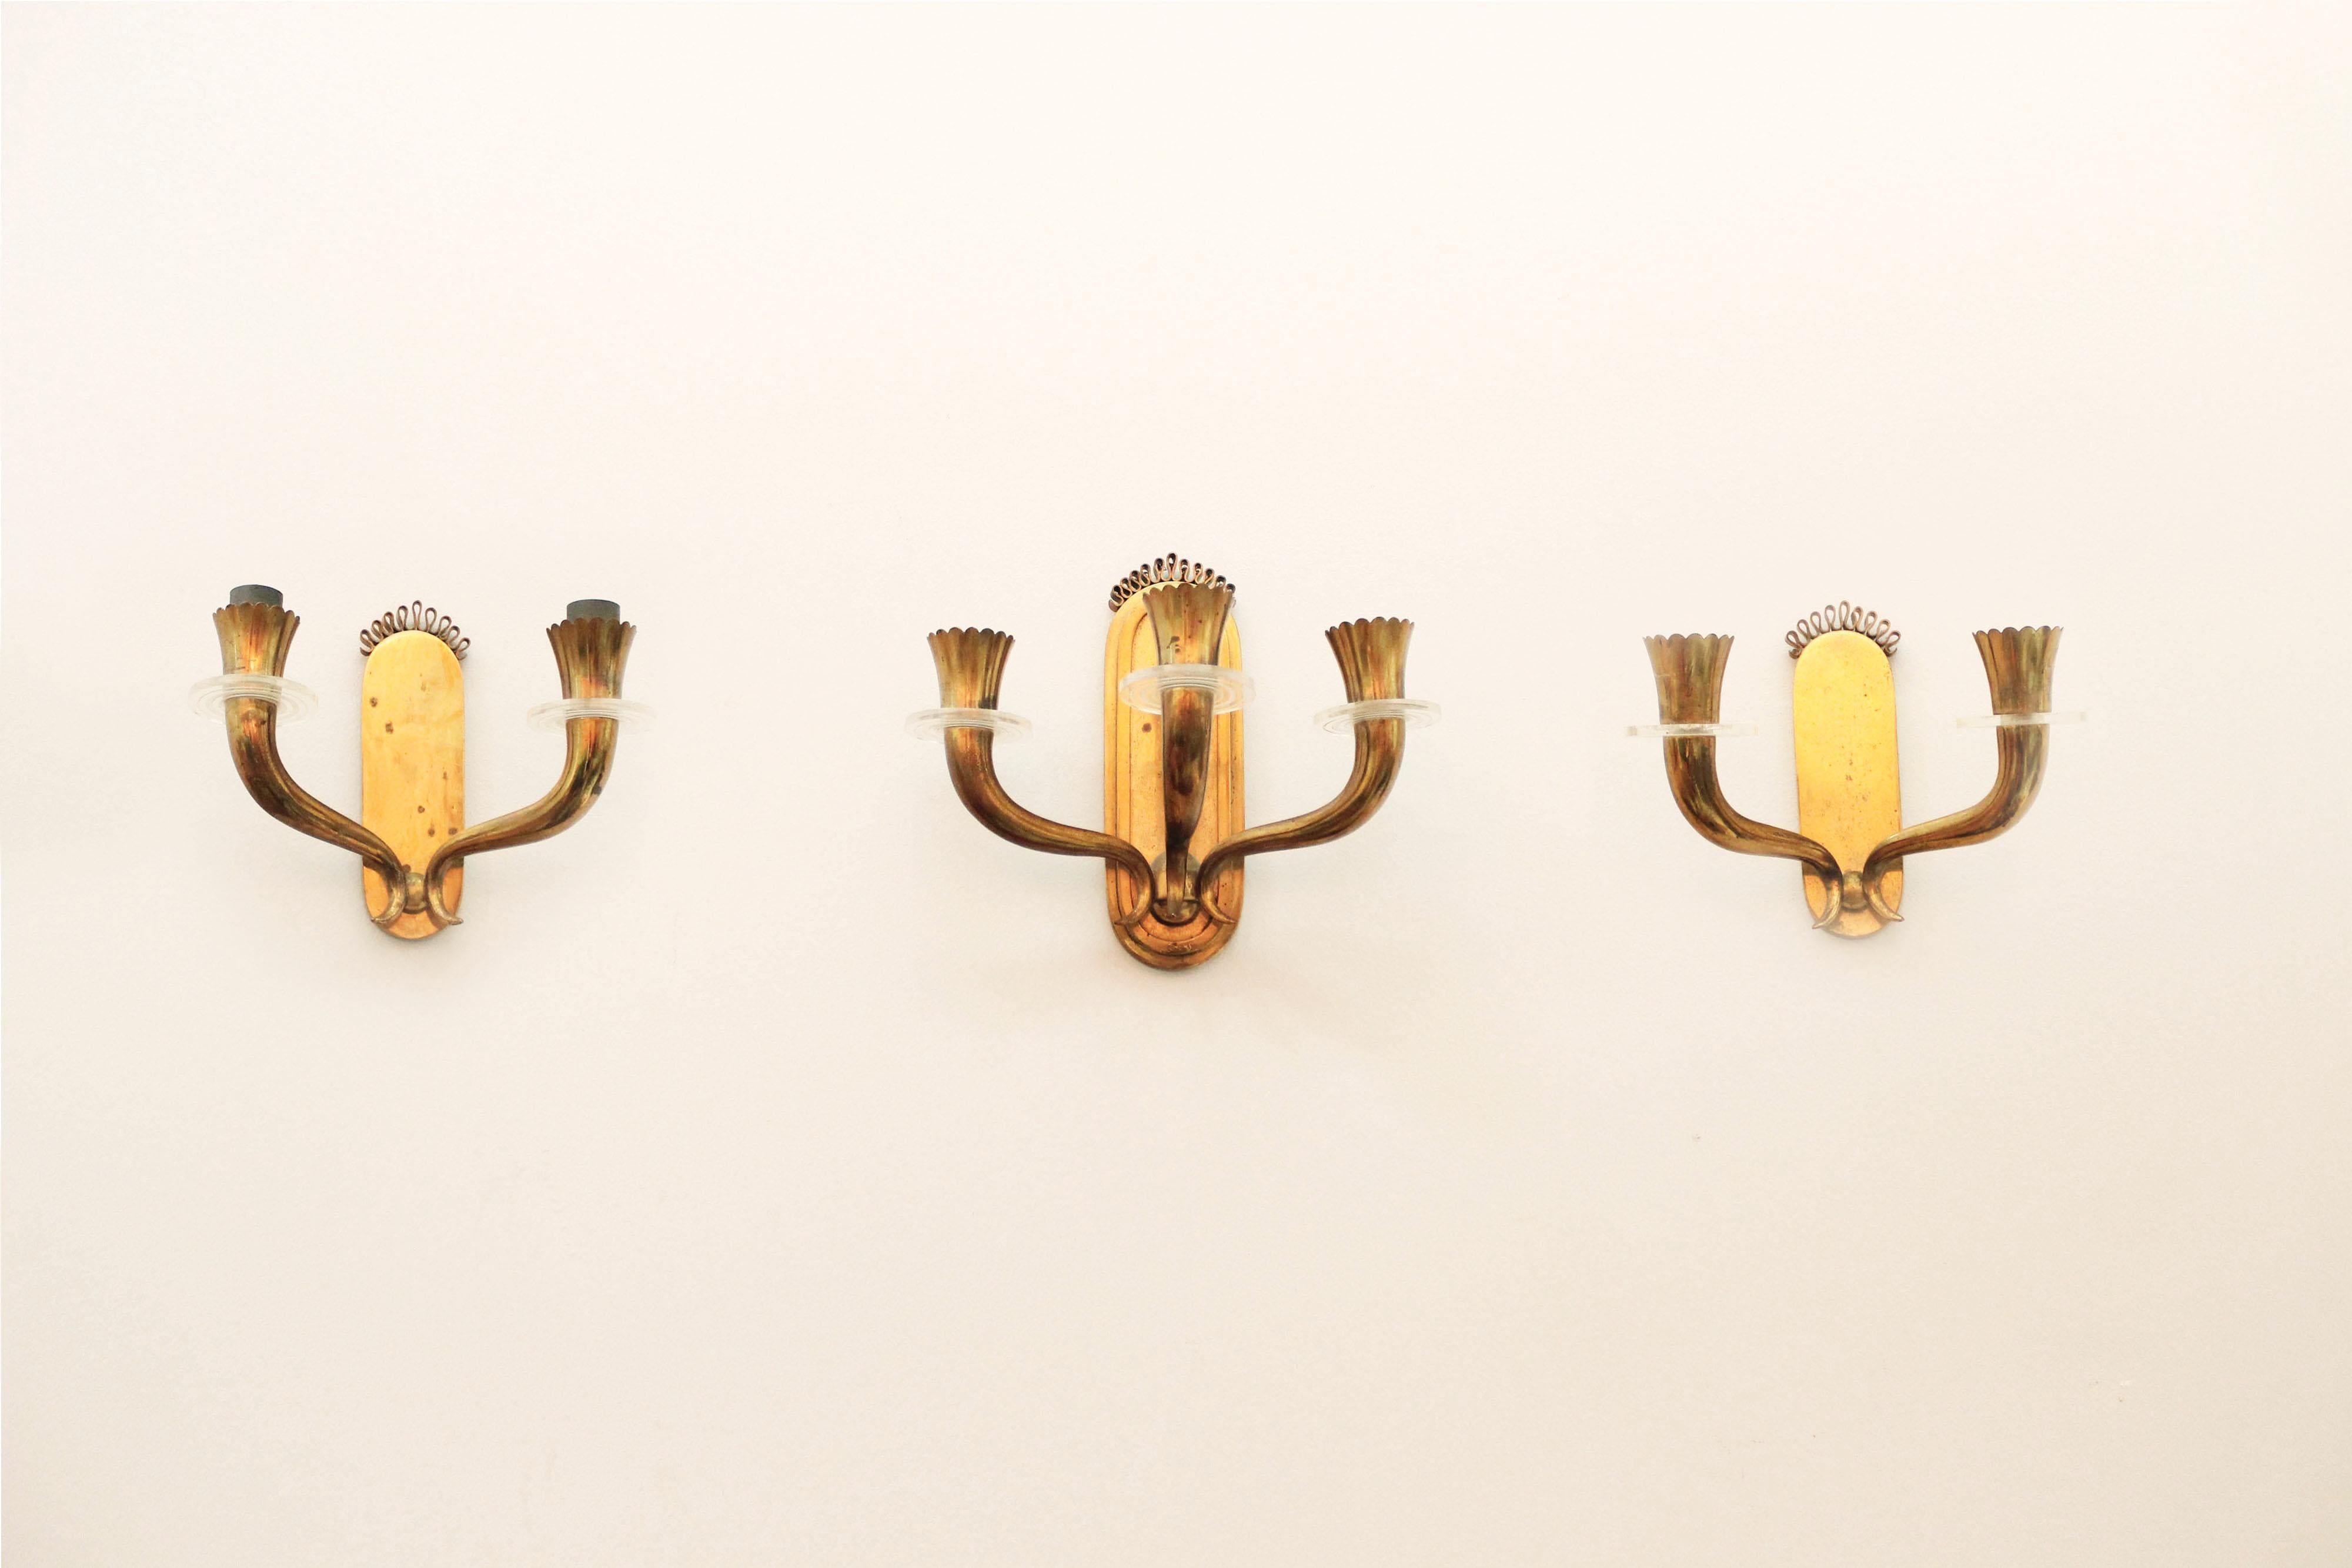 Set of three gilt brass sconces by Gio Ponti, 1940s. They need polishing. The two-light sconces are 13 cm deep, the three-light one is 15.5 cm deep.
European socket (up to 250V)